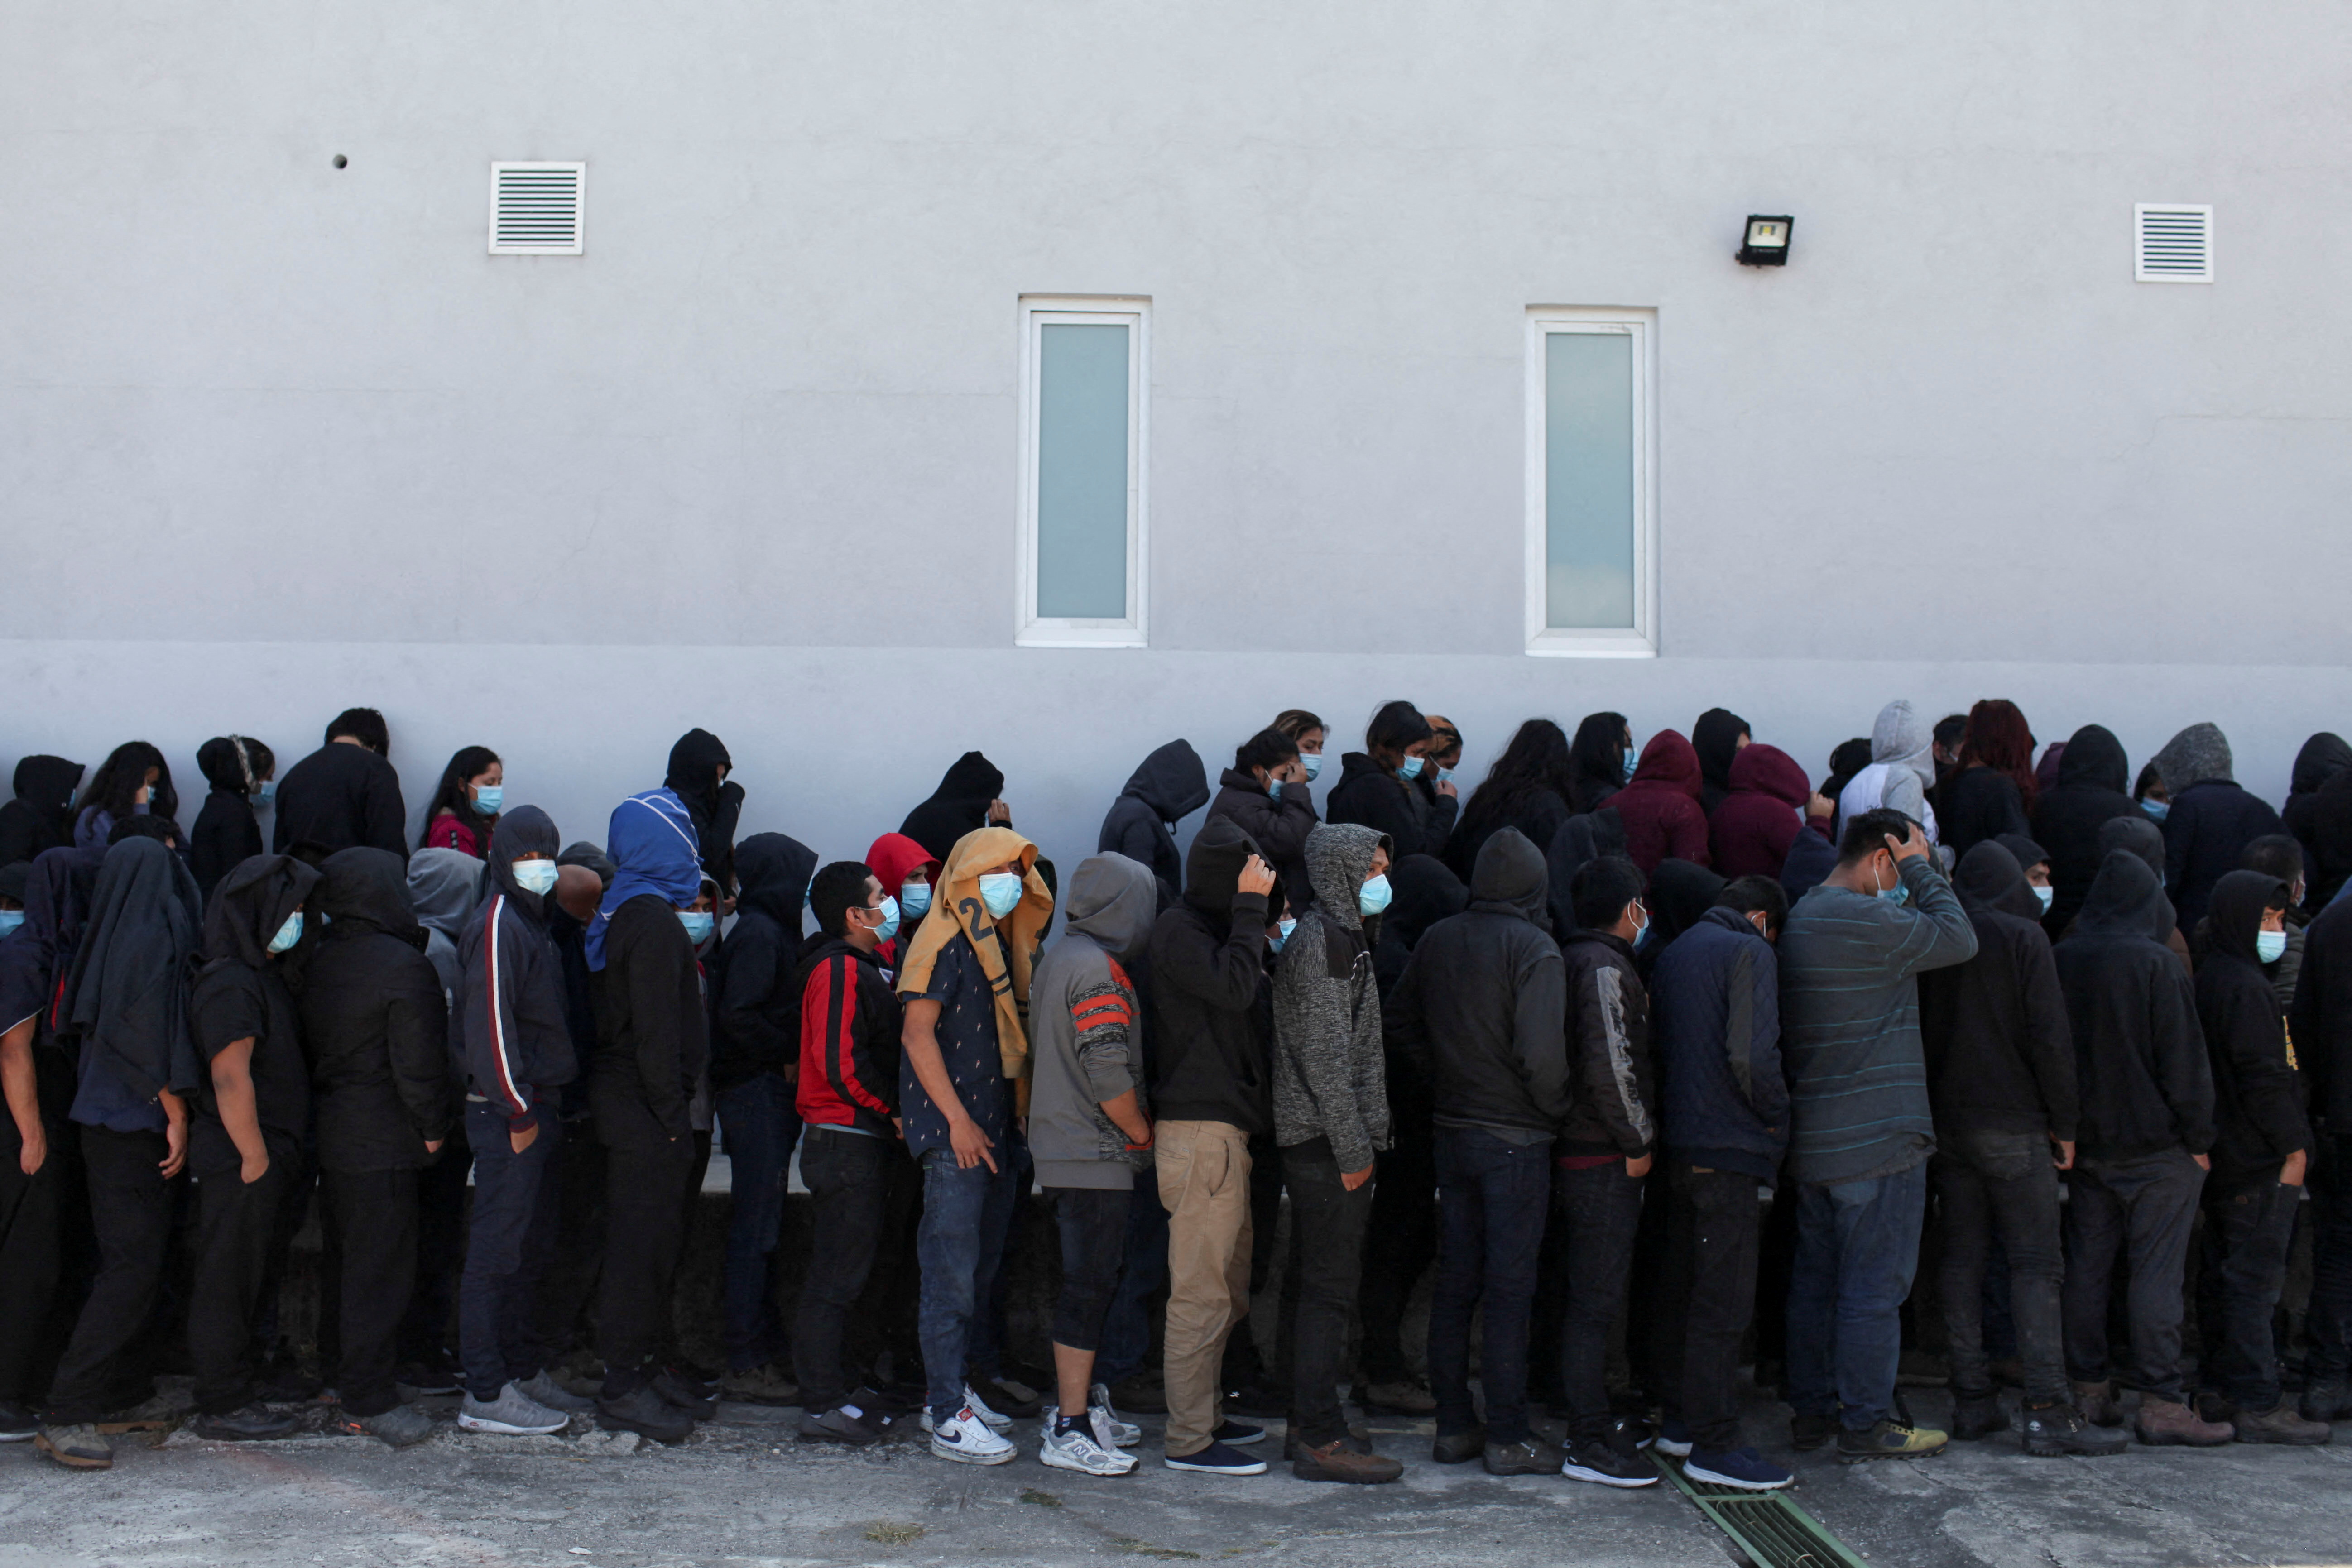 Guatemalan deportees queue outside a government migration facility after arriving on a deportation flight from the U.S., at the Guatemalan Air Force (FAG) headquarters in La Aurora International airport, in Guatemala City, Guatemala December 28, 2021. REUTERS/Sandra Sebastian